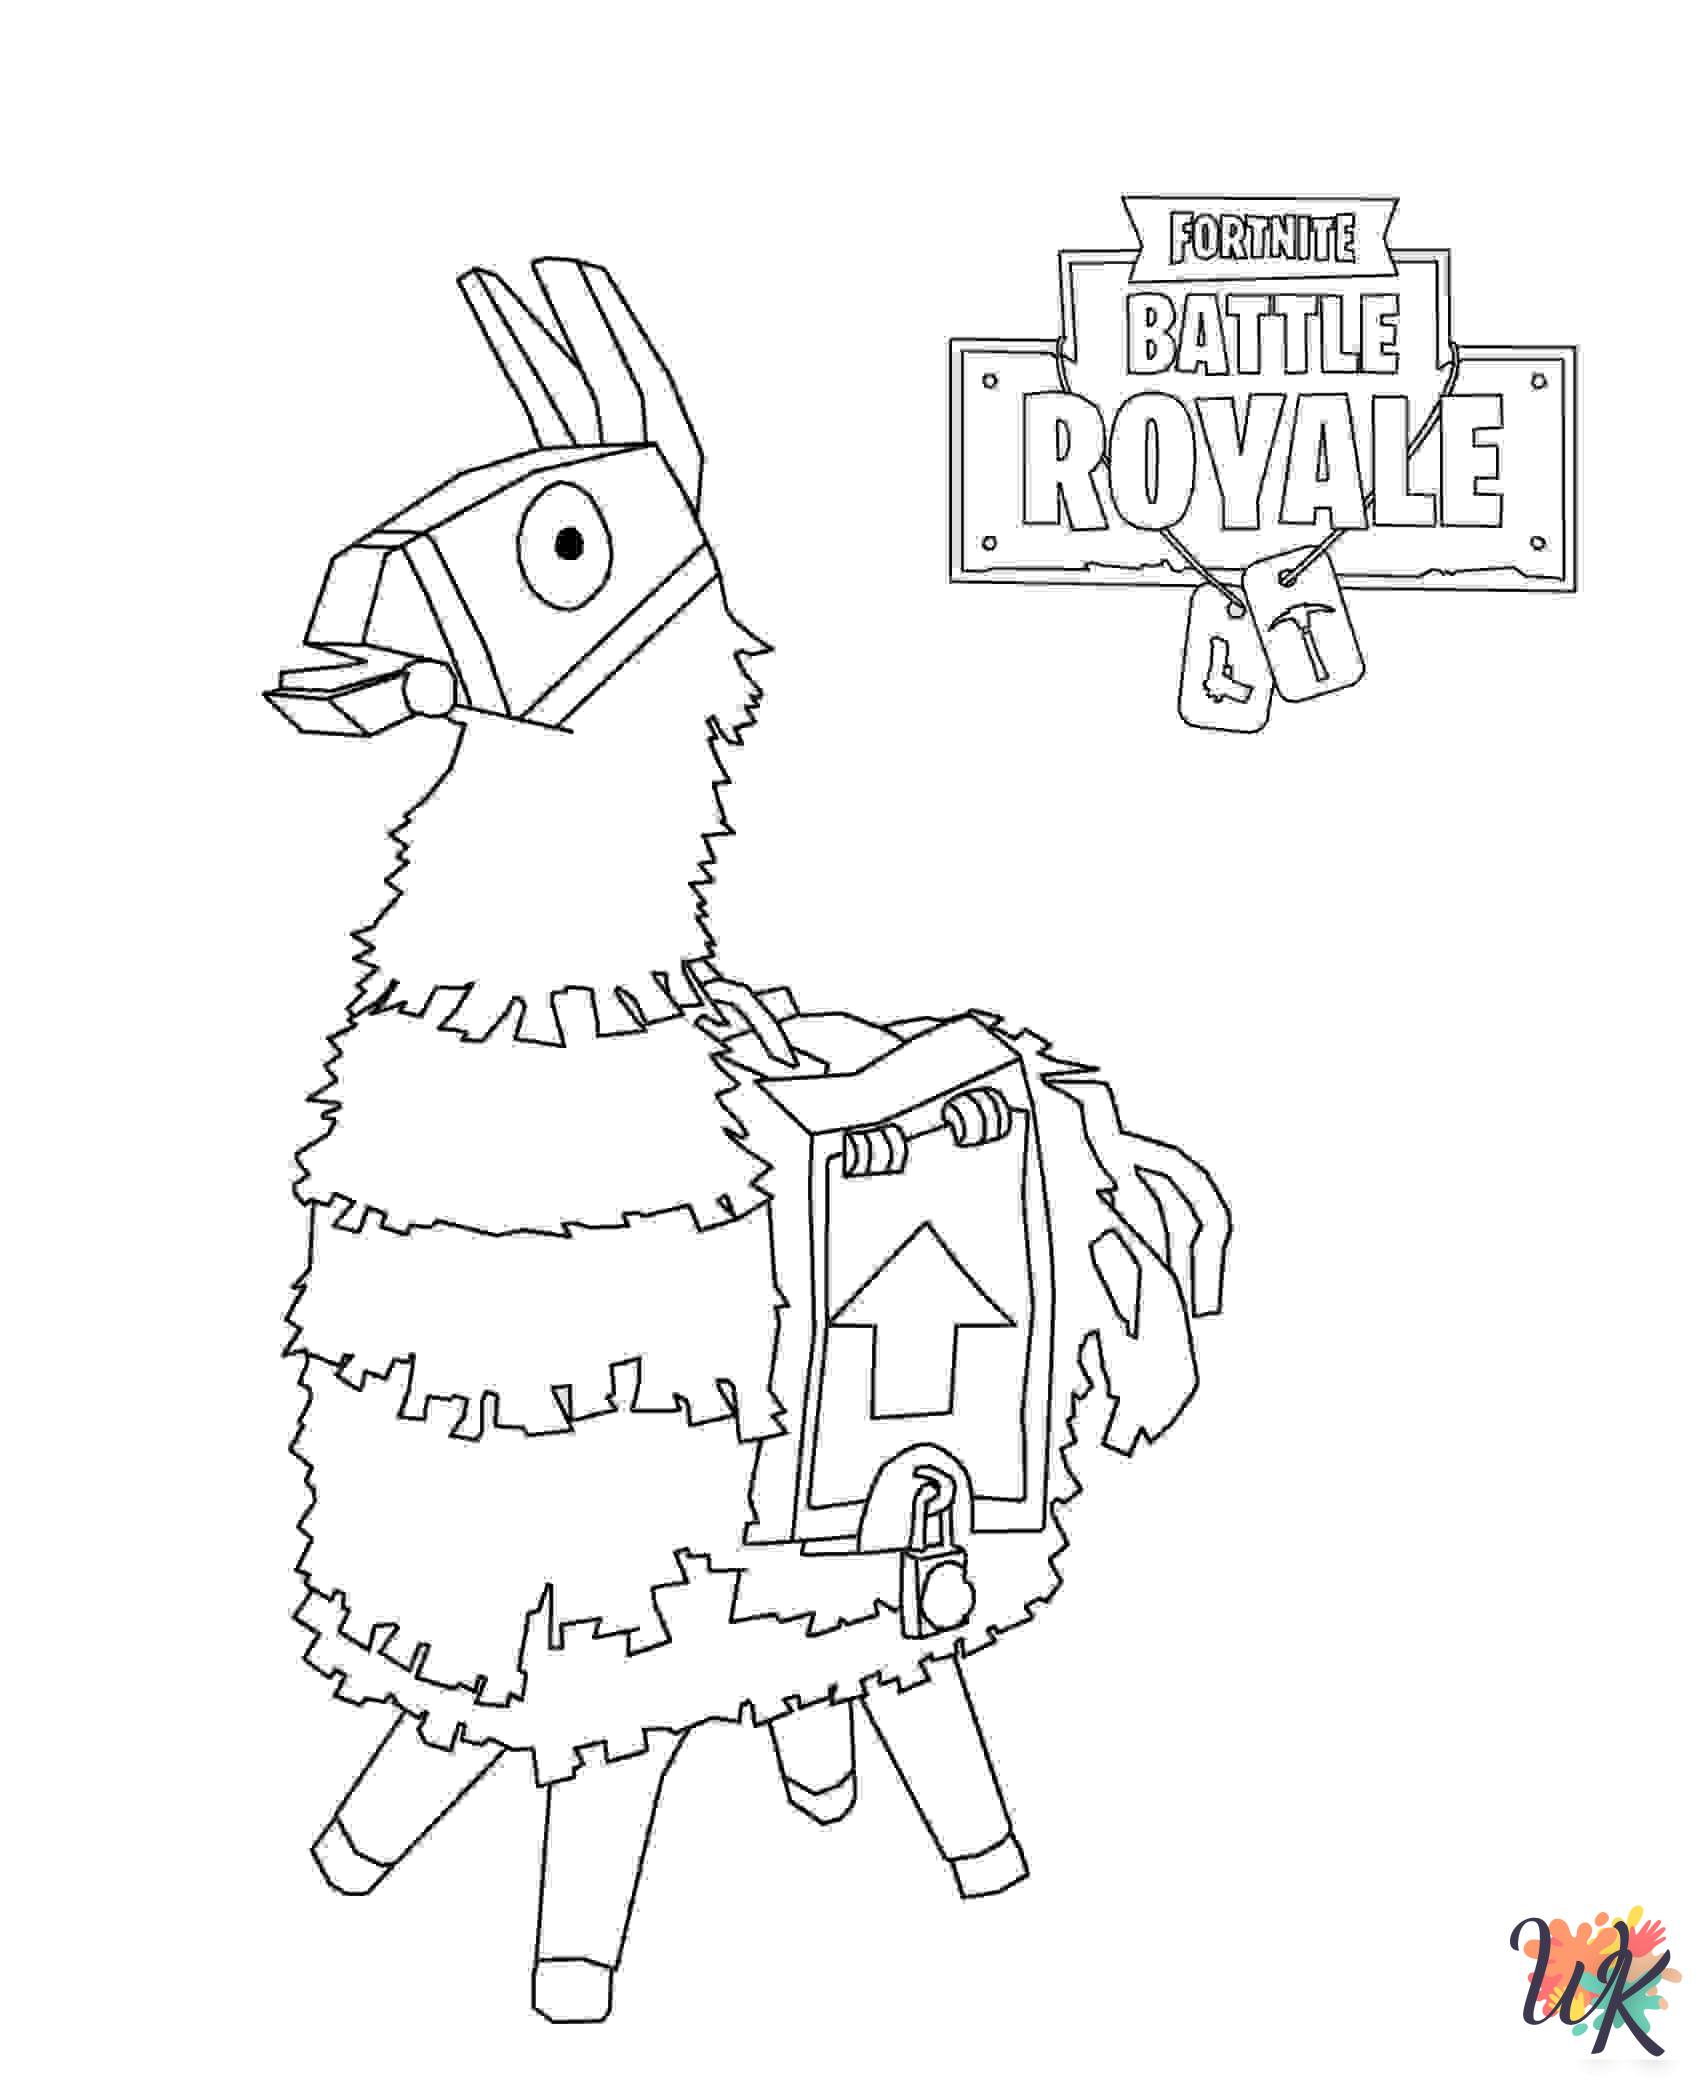 Fornite coloring pages for adults pdf